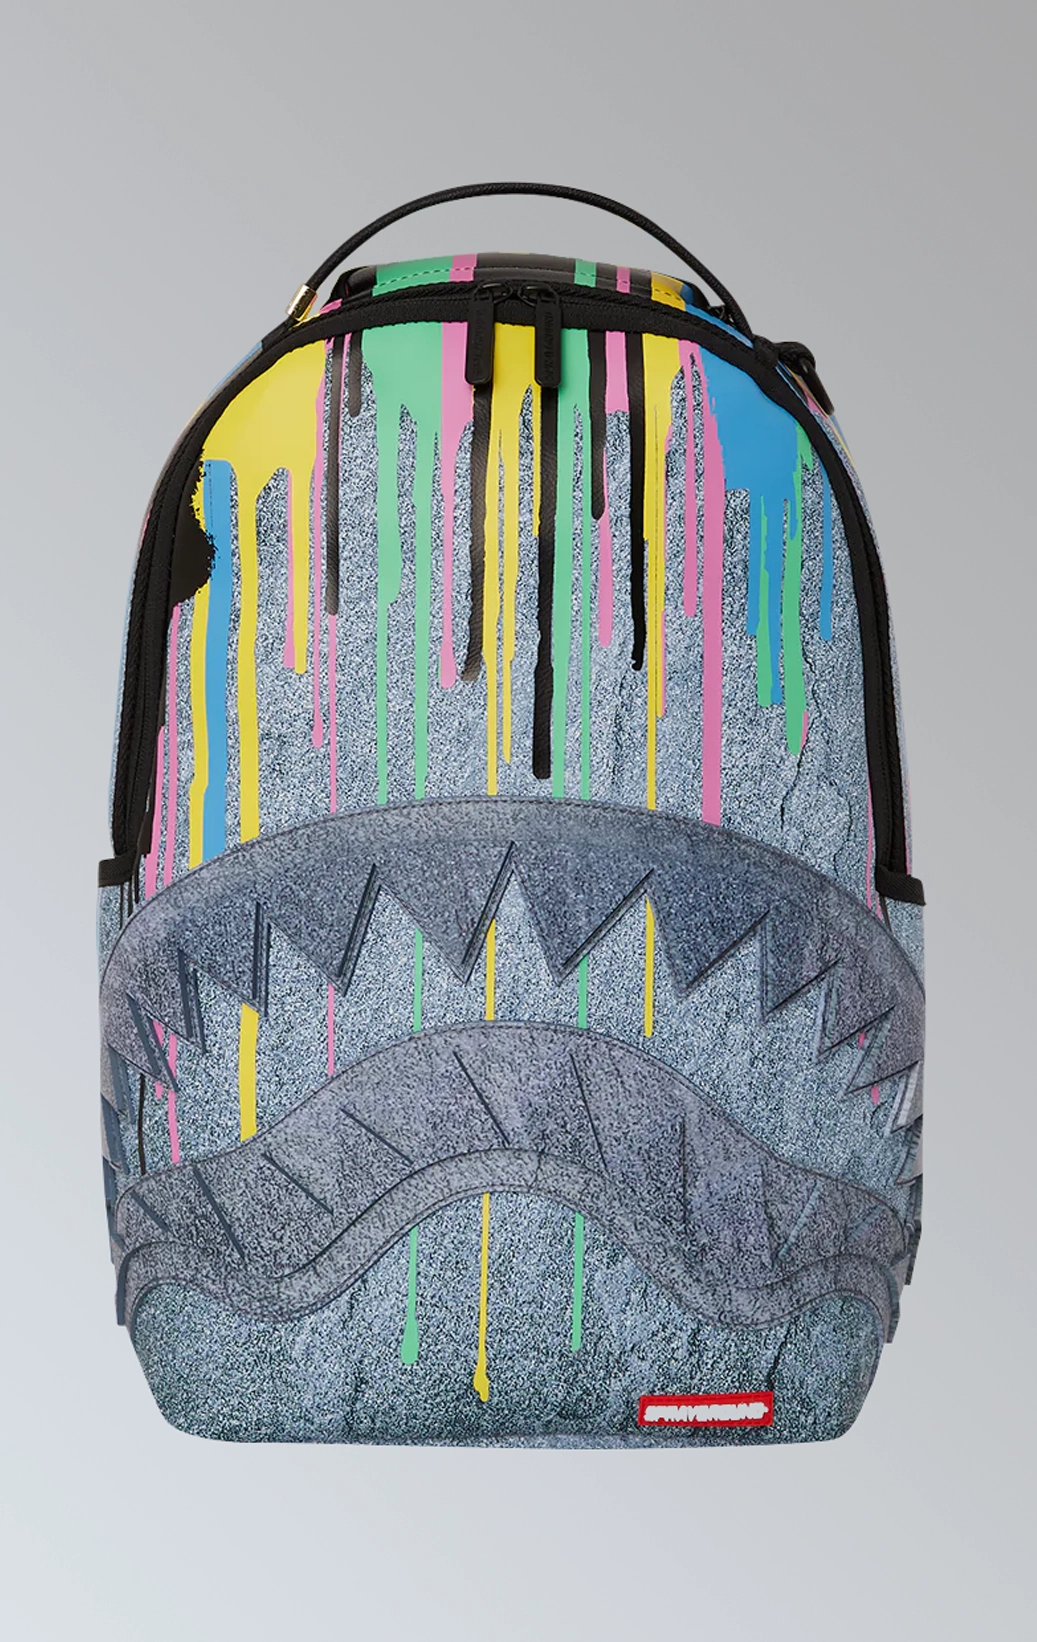 Drippy Stone Shark limited edition backpack from Sprayground that features a unique stone shark design with dripping details.